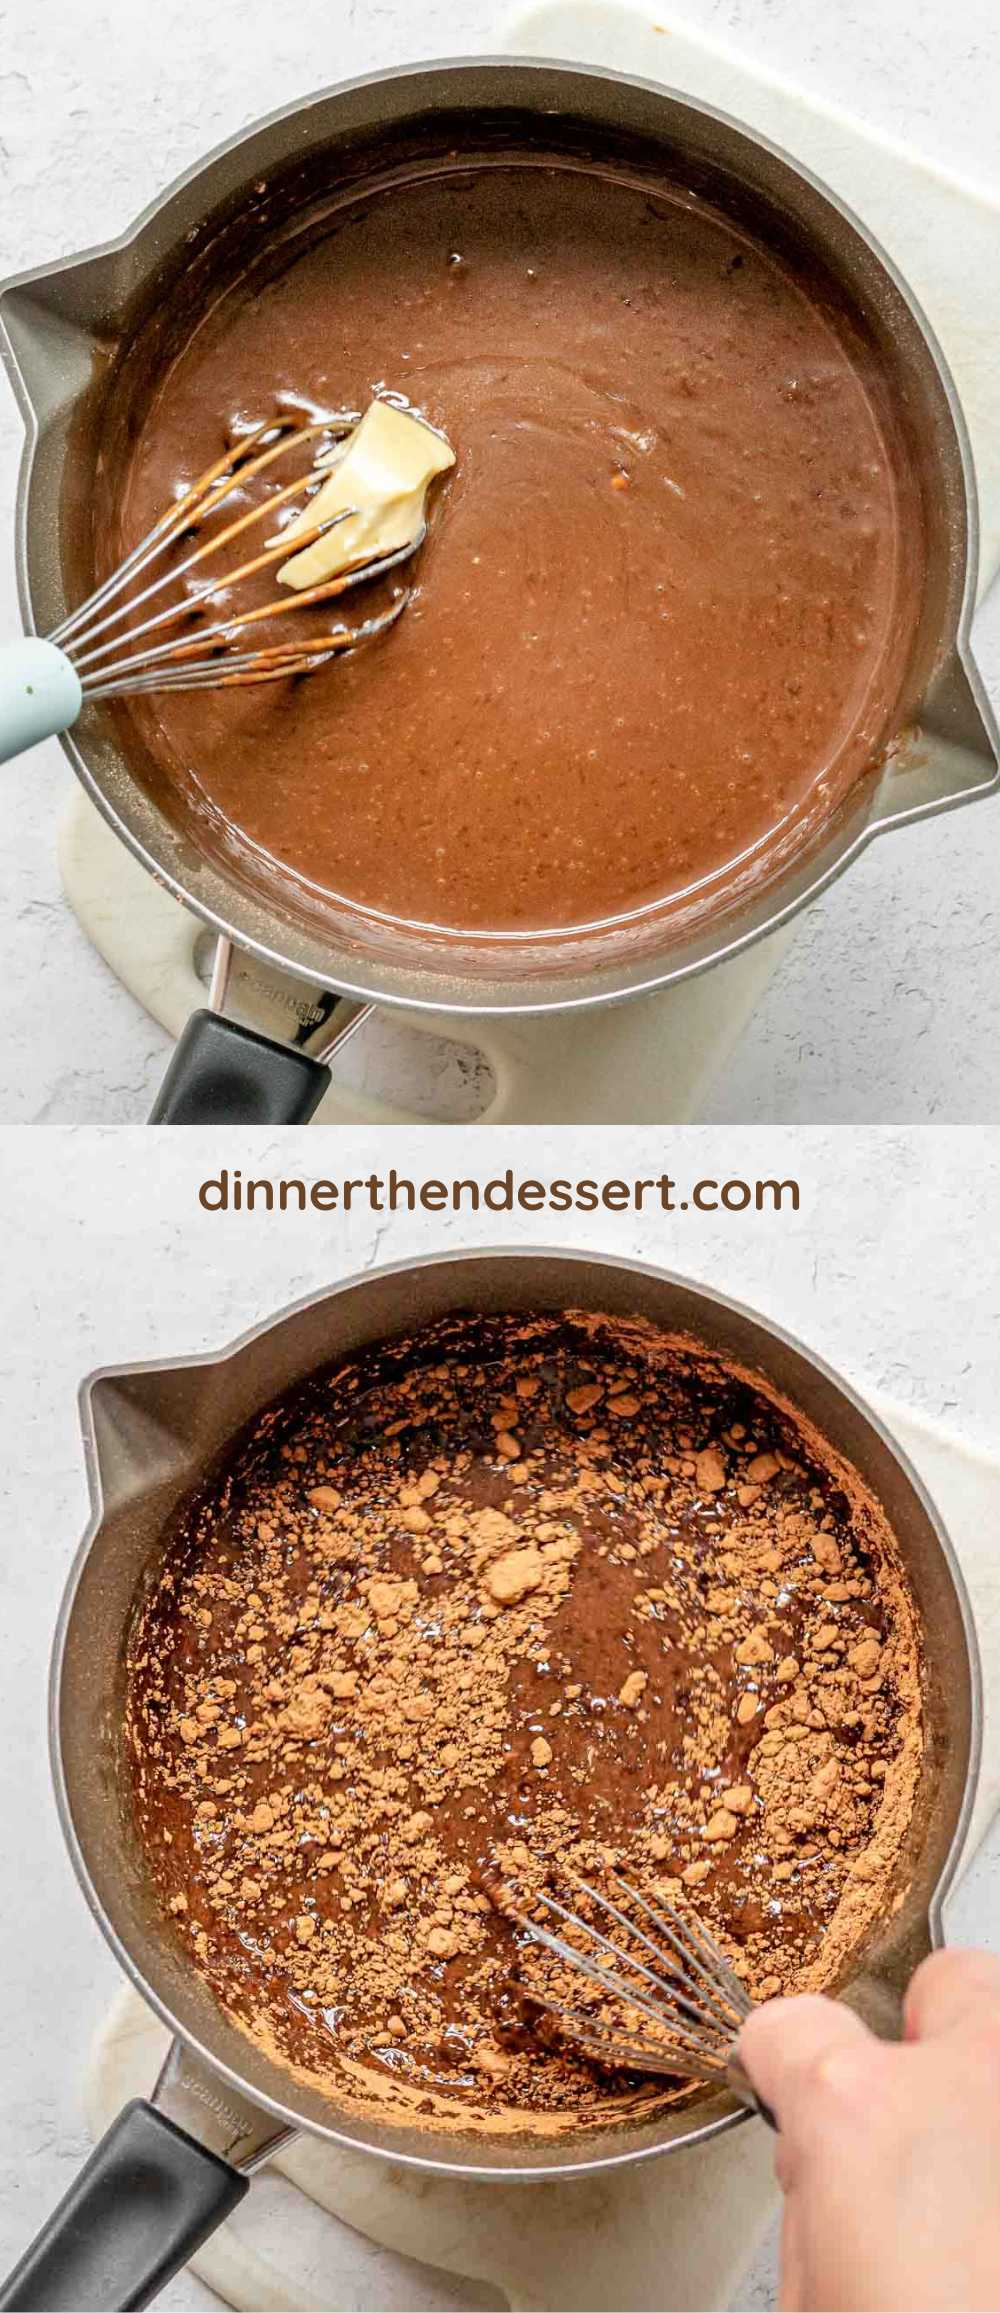 Chocolate gravy ingredients mixed in pan.